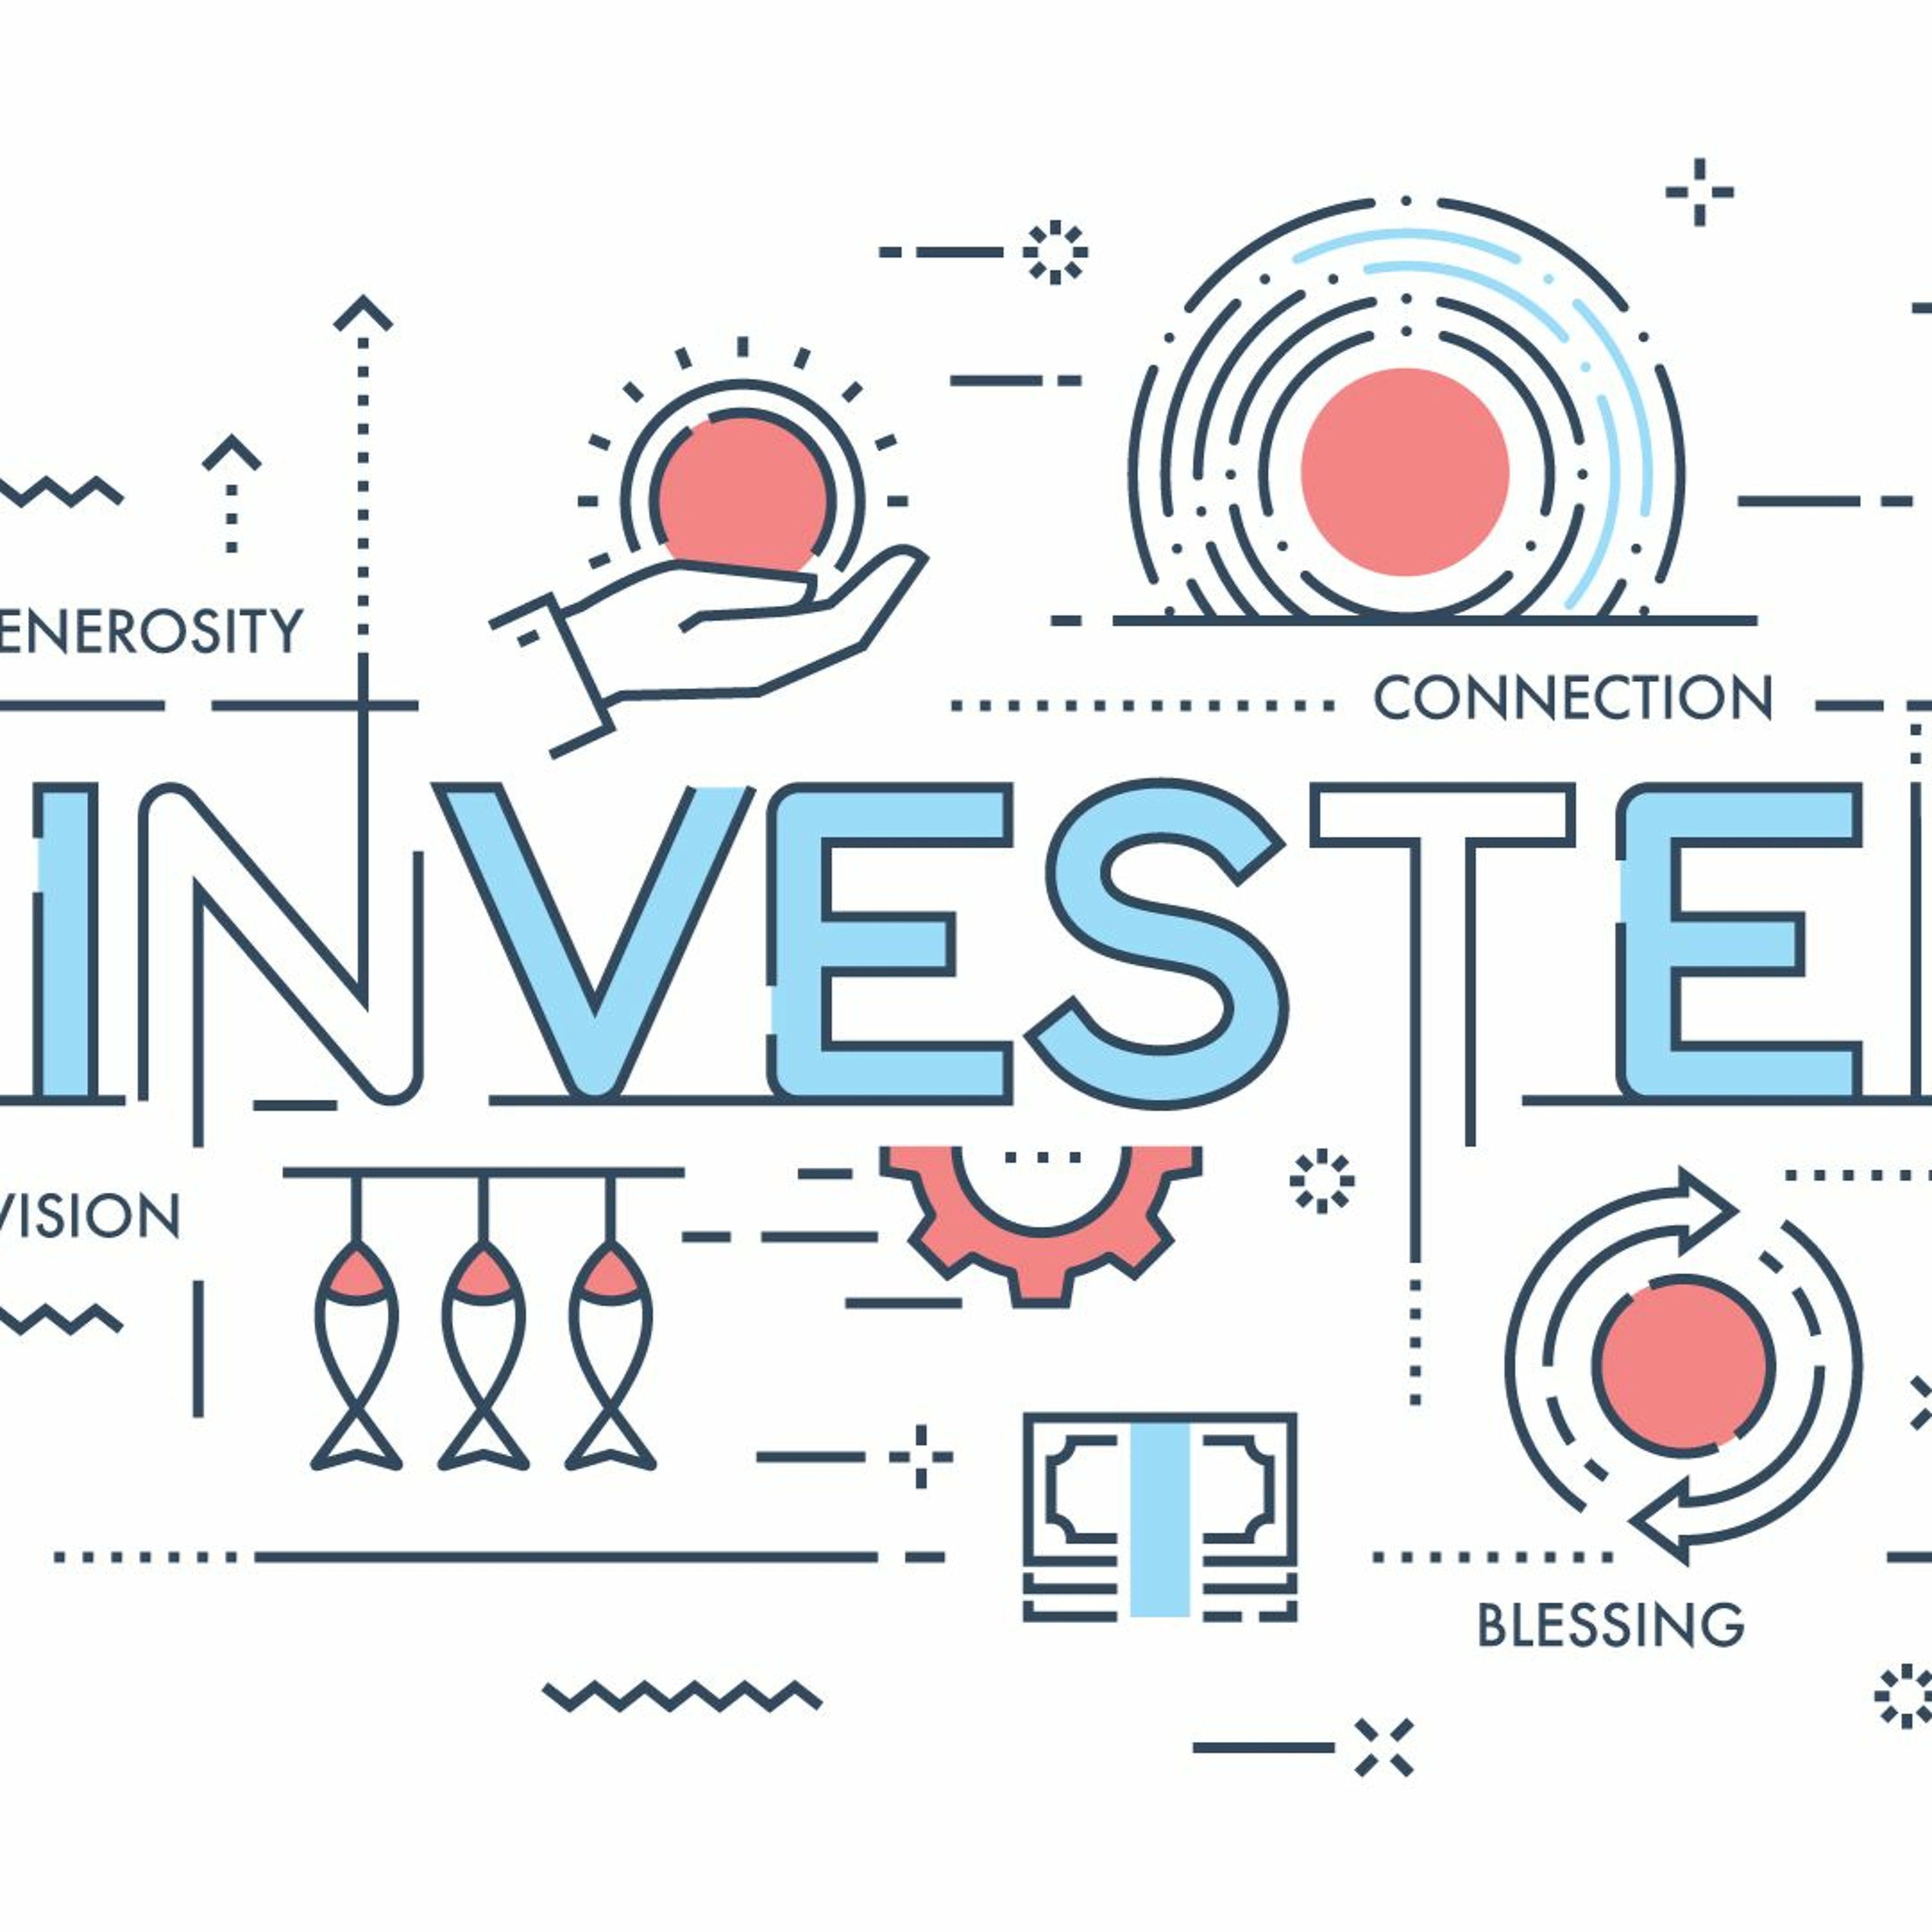 Investing in God's Provision | Invested | Ethan Magness